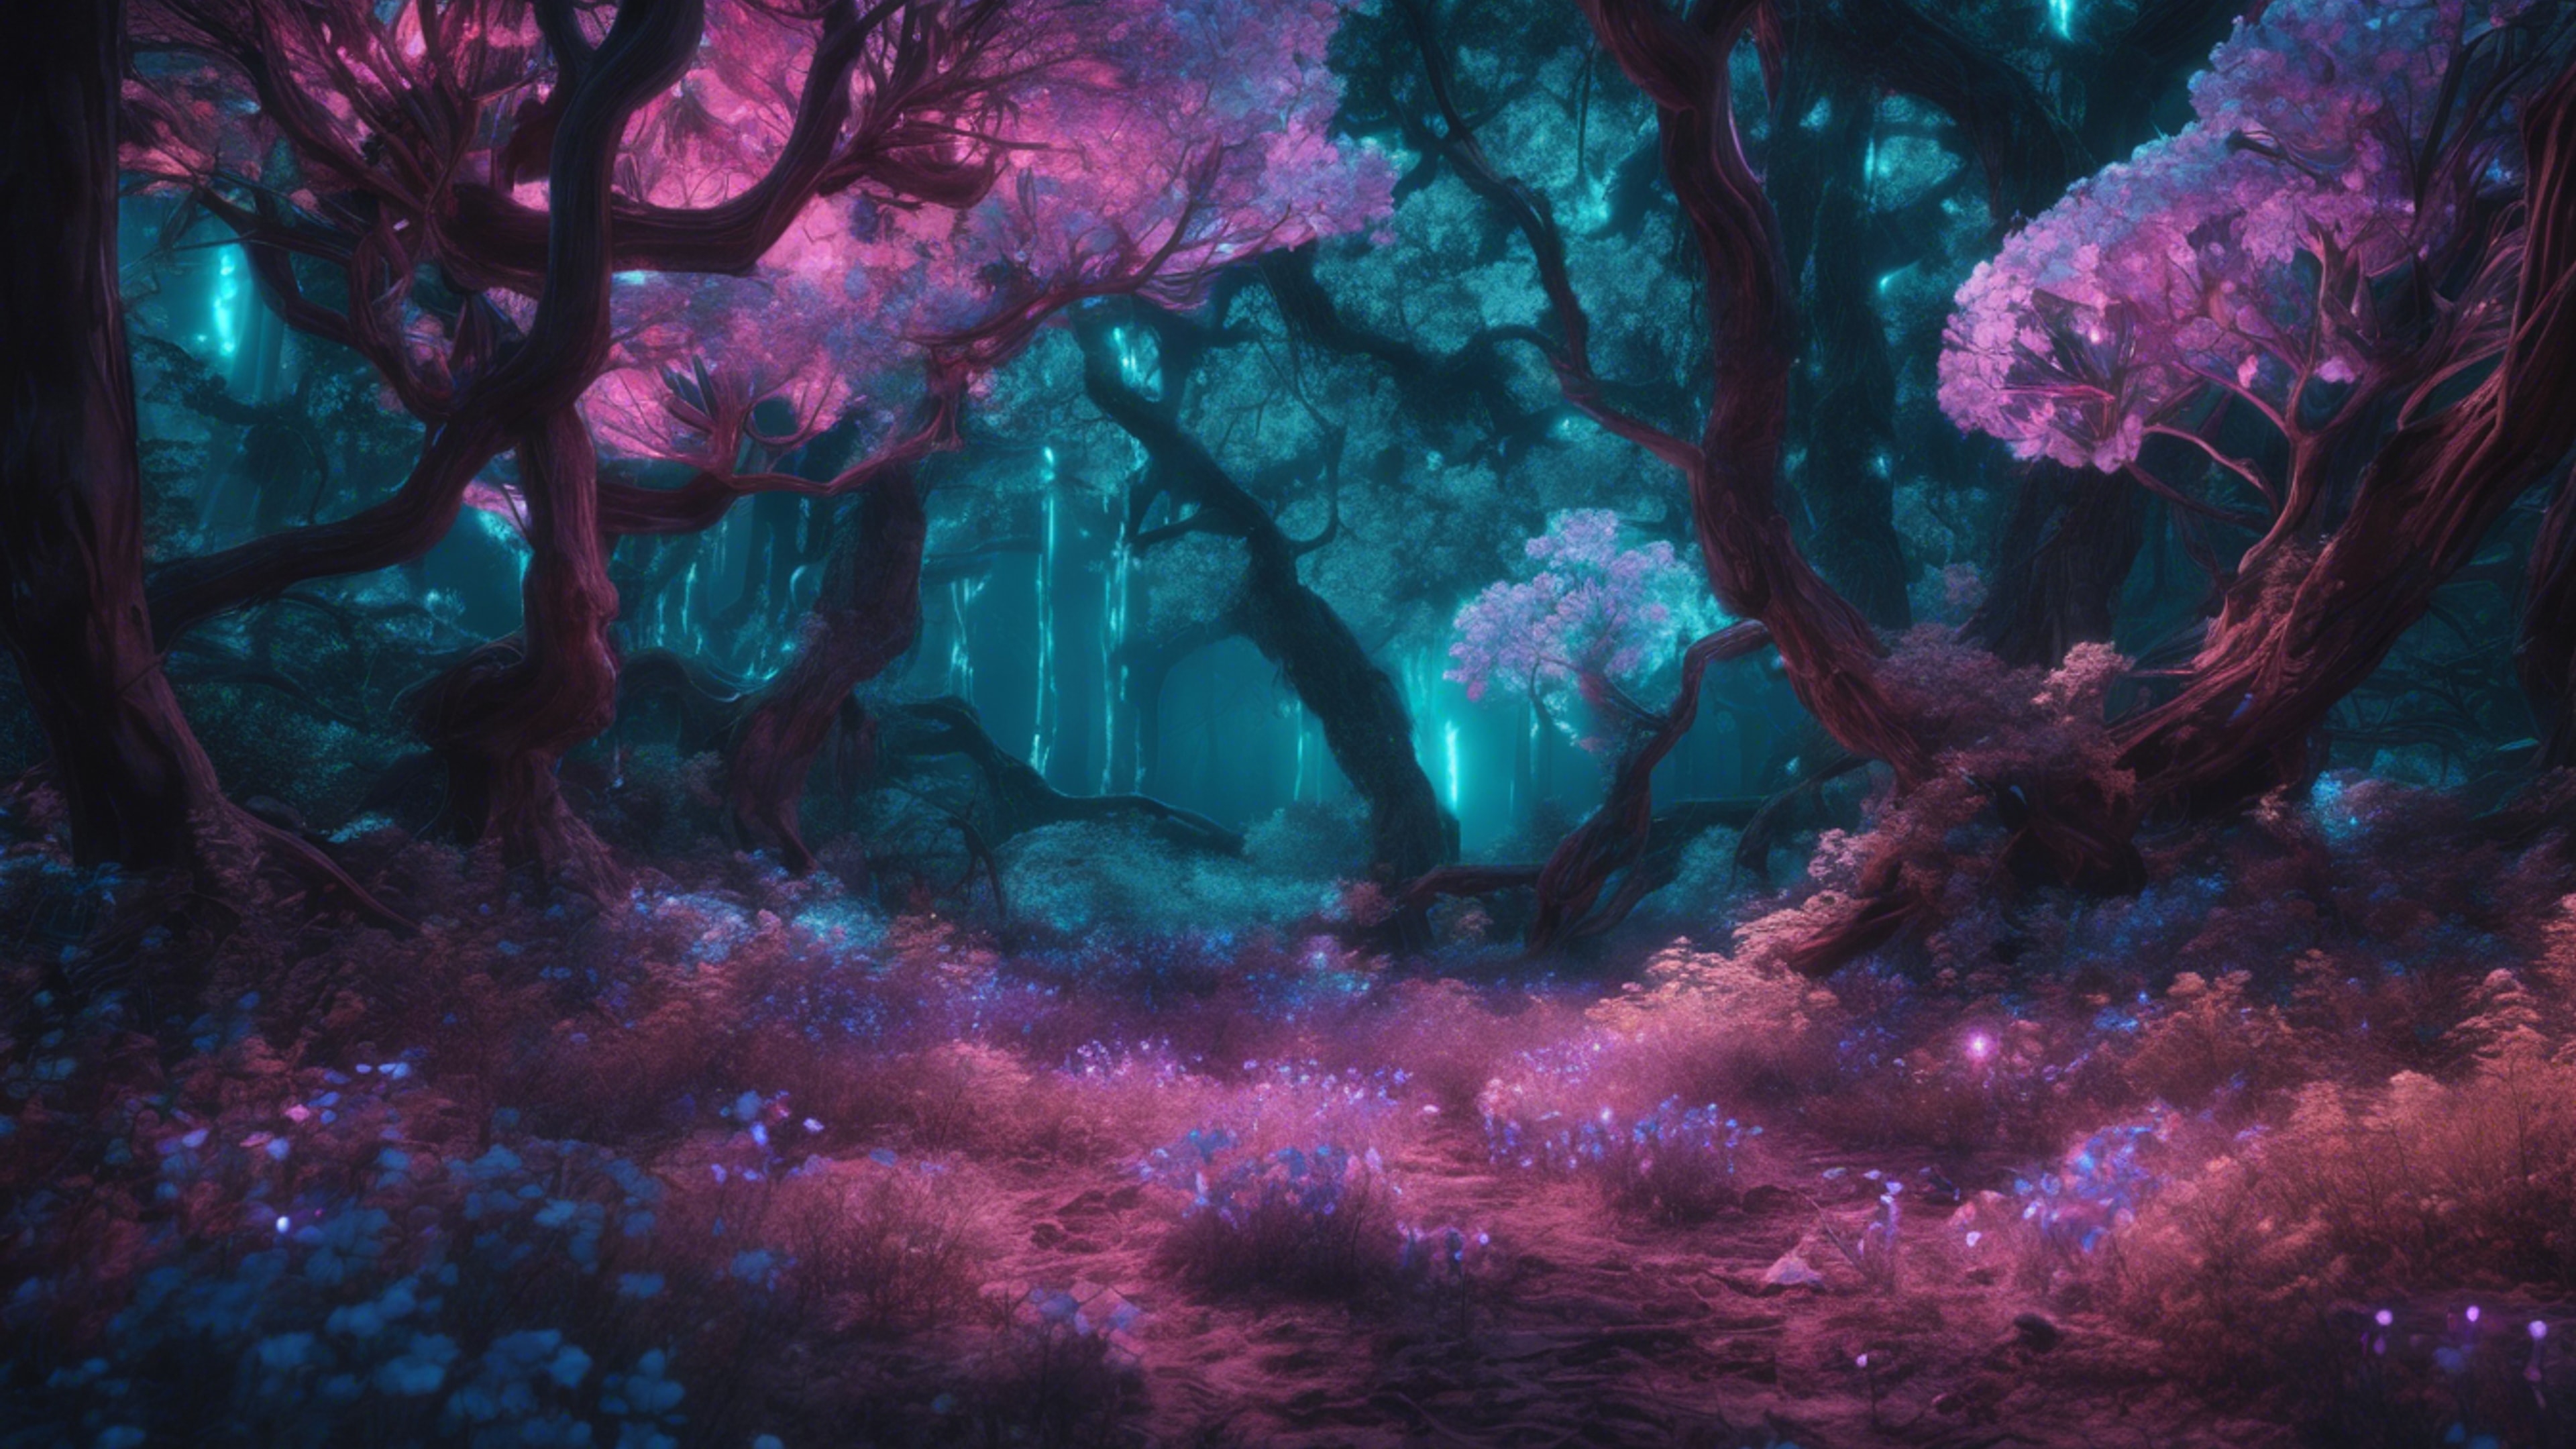 A Y2K style digital forest with illuminated bioluminescent trees and neon glowing flowers. 벽지[de86584624734c4ebdfb]